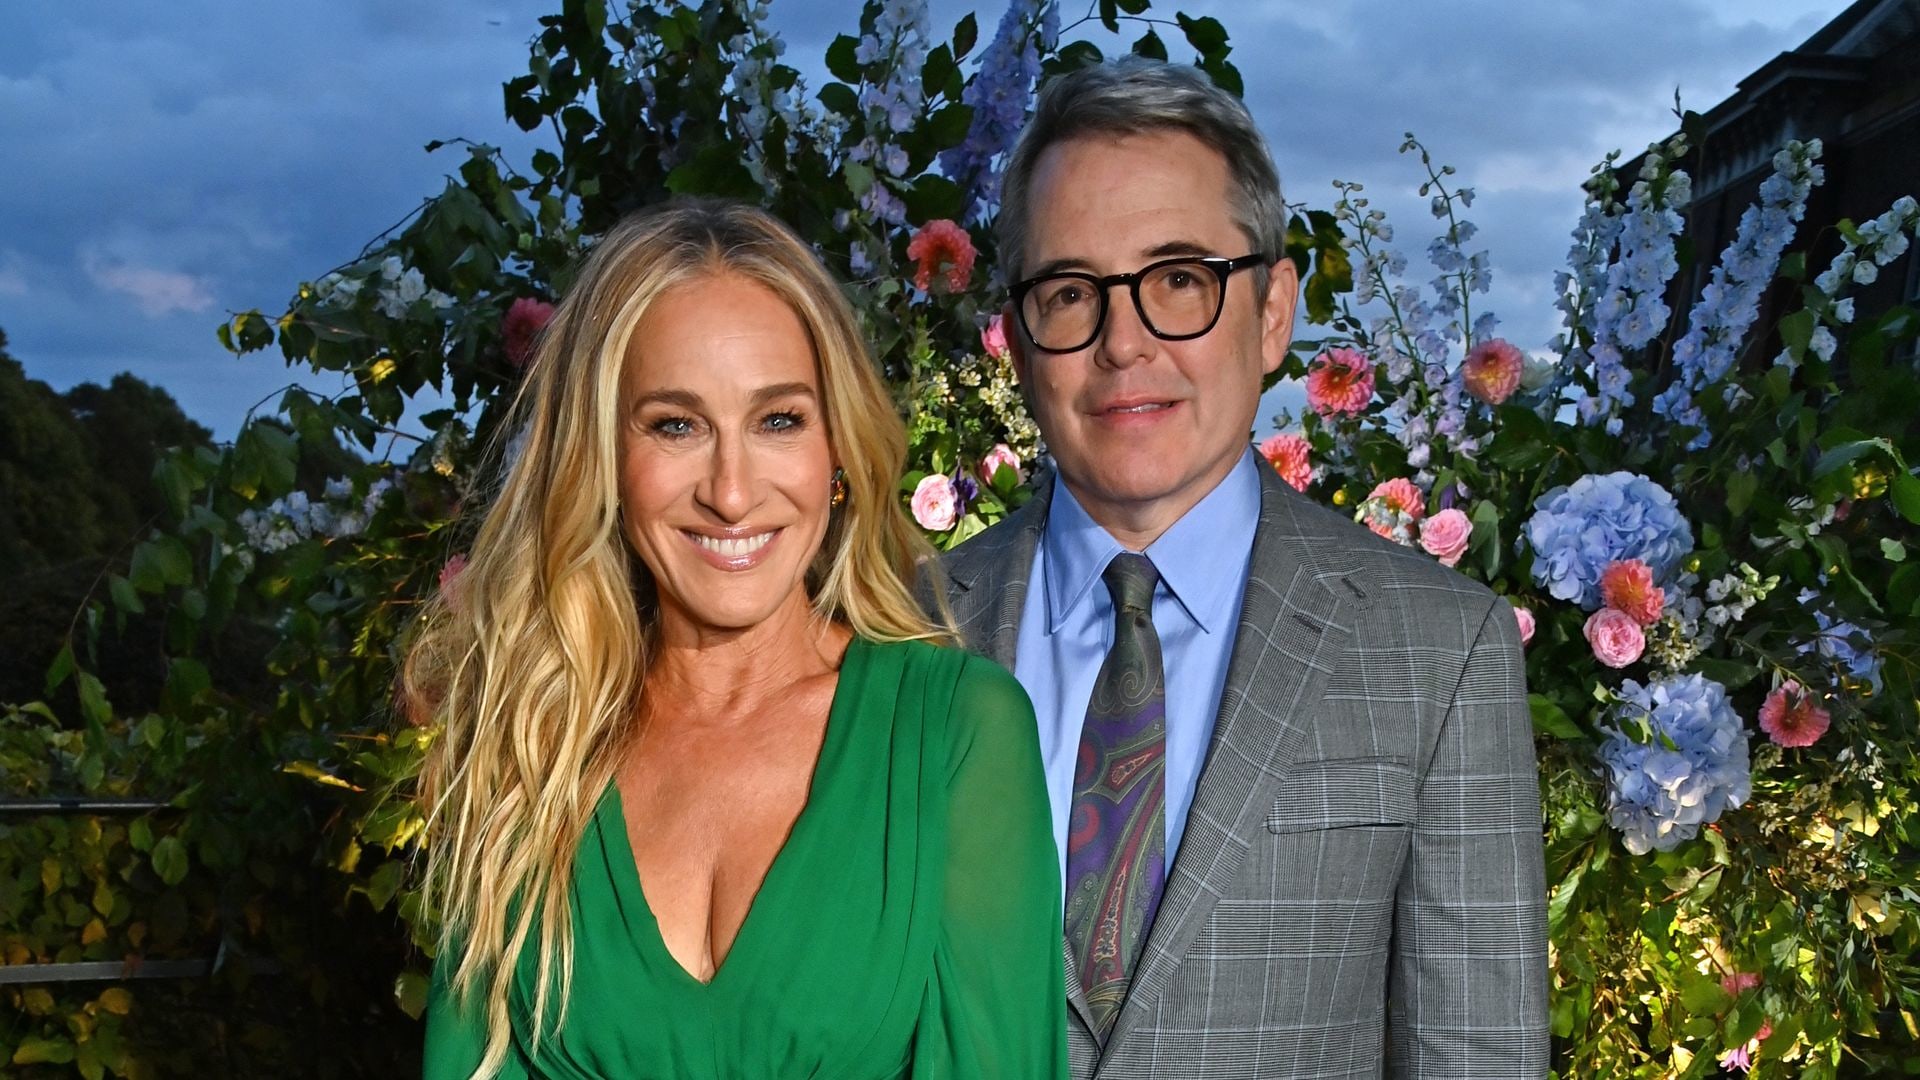 Sarah Jessica Parker and Matthew Broderick turn heads at the party